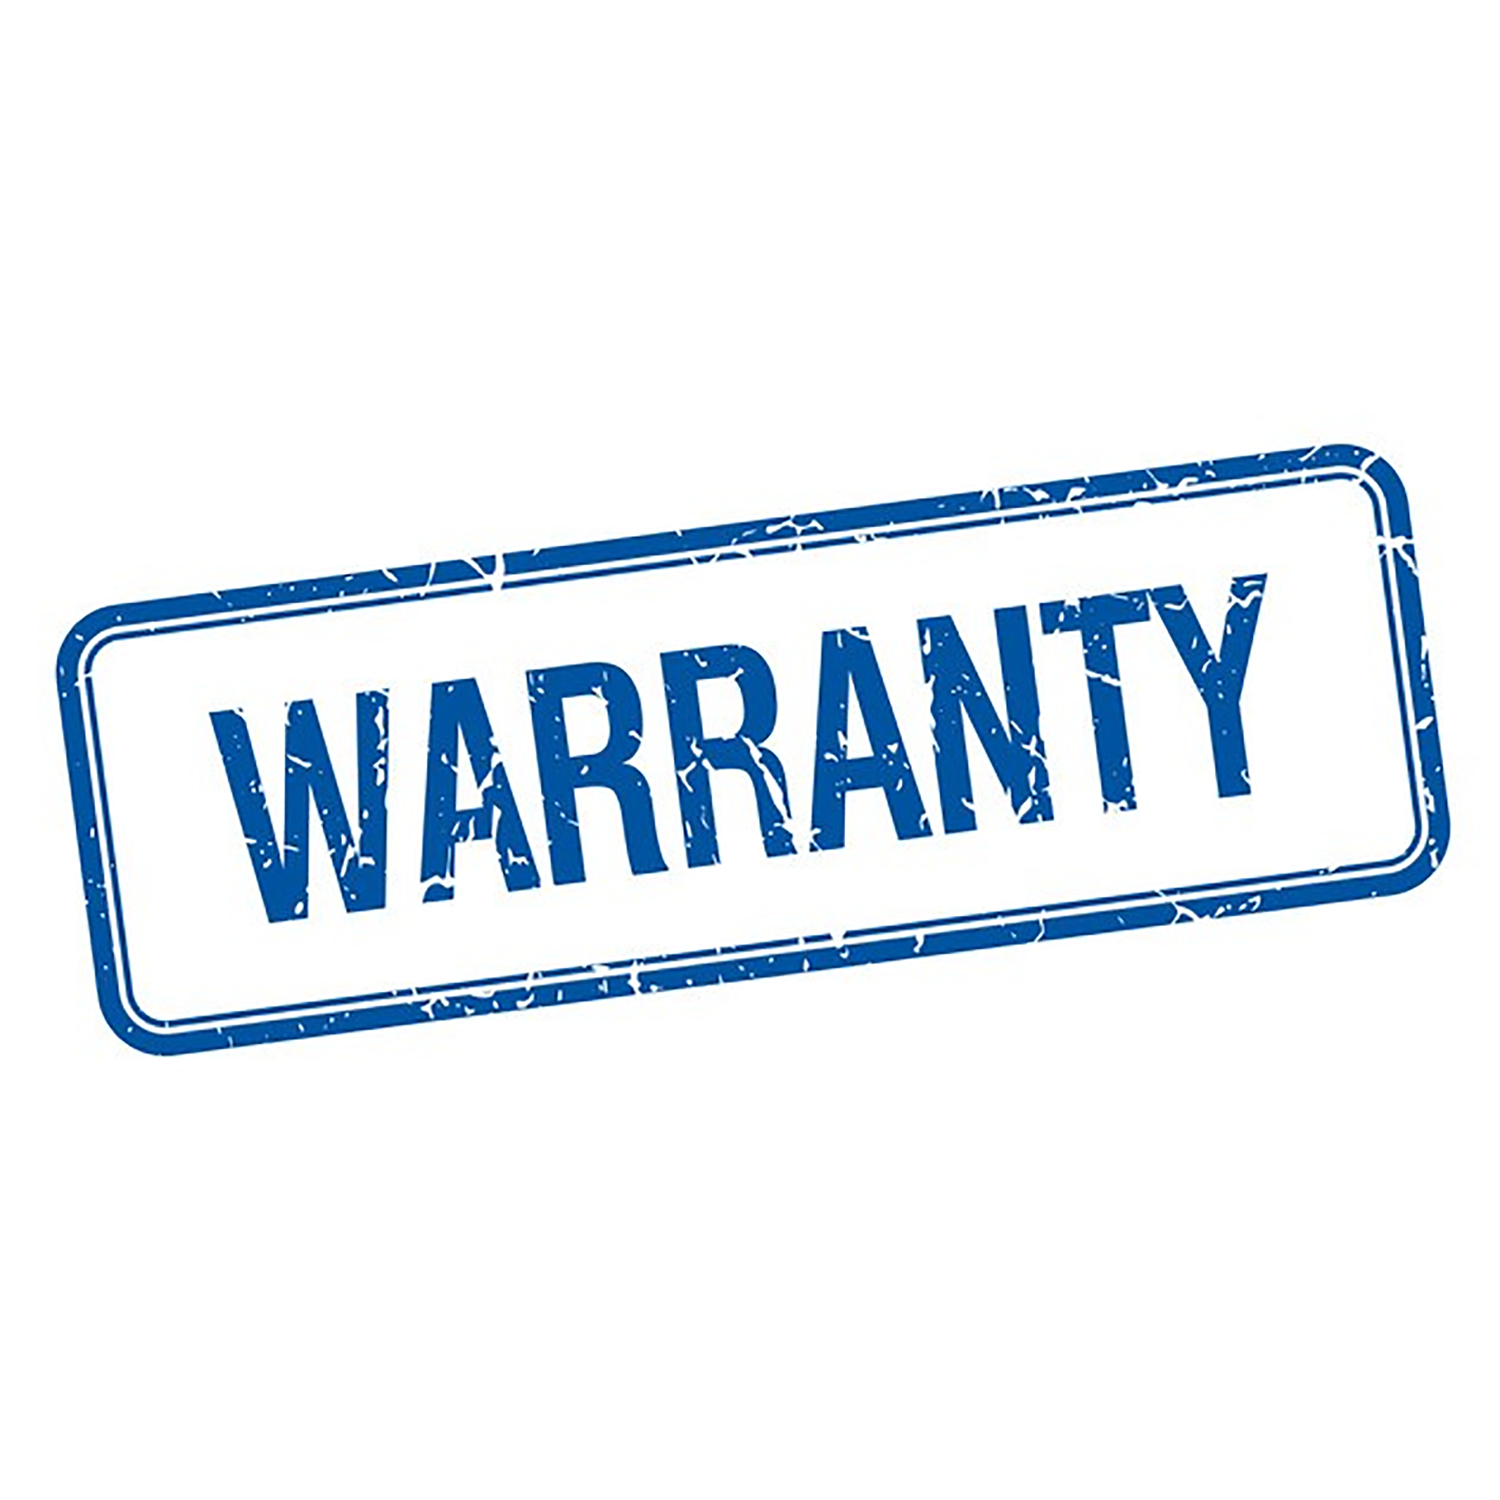 Extended 2 year comprehensive warranty for the seca CT330